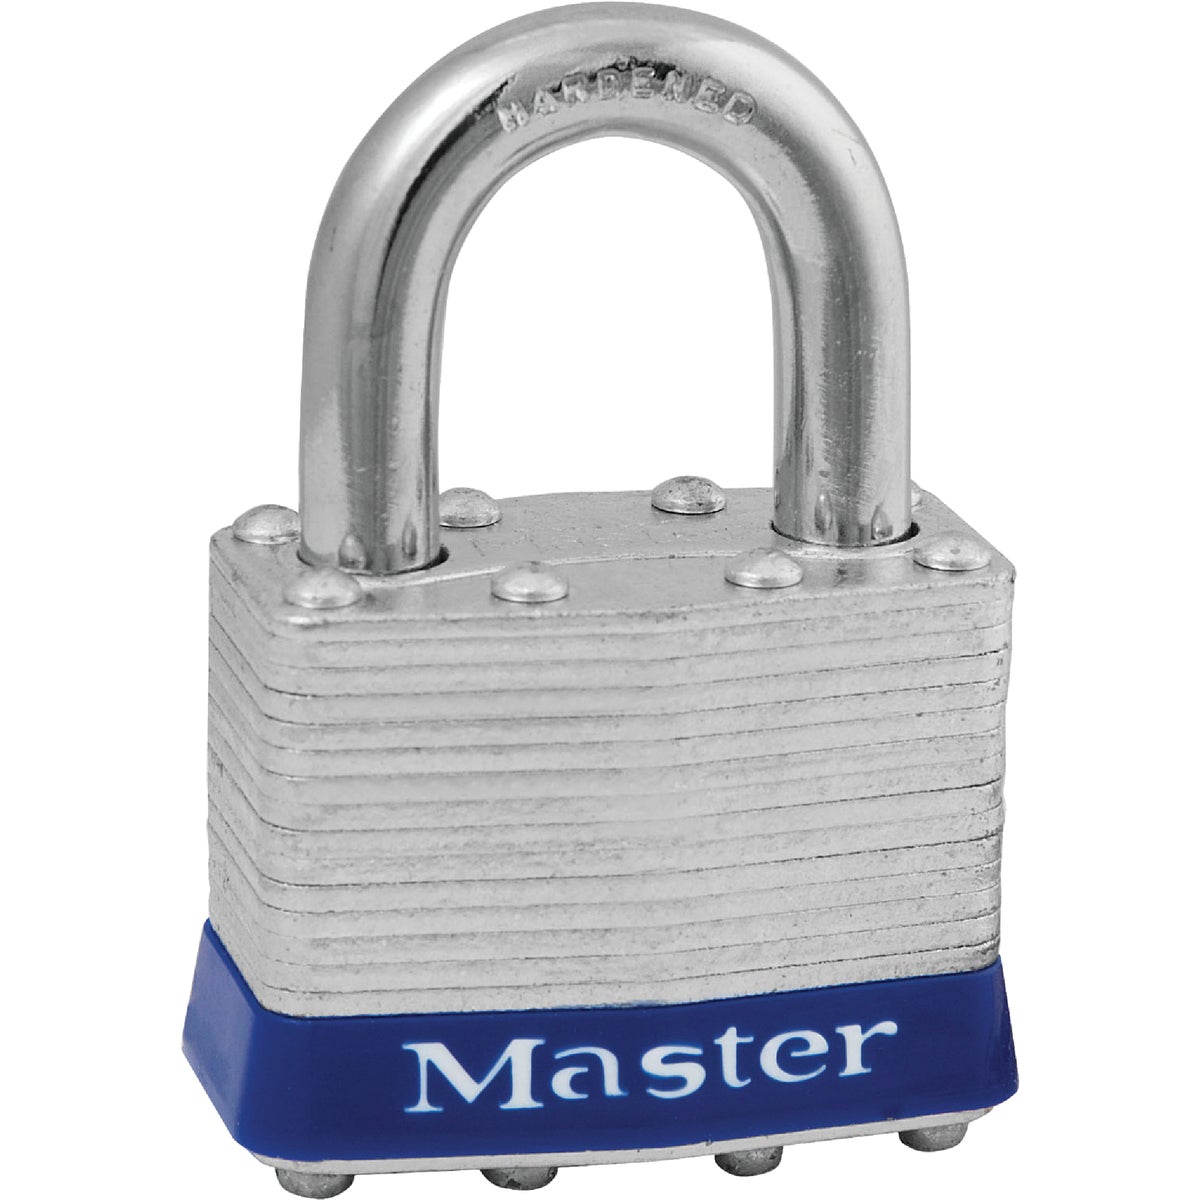 Item 244015, For use with Master Lock's universal pin keying system.